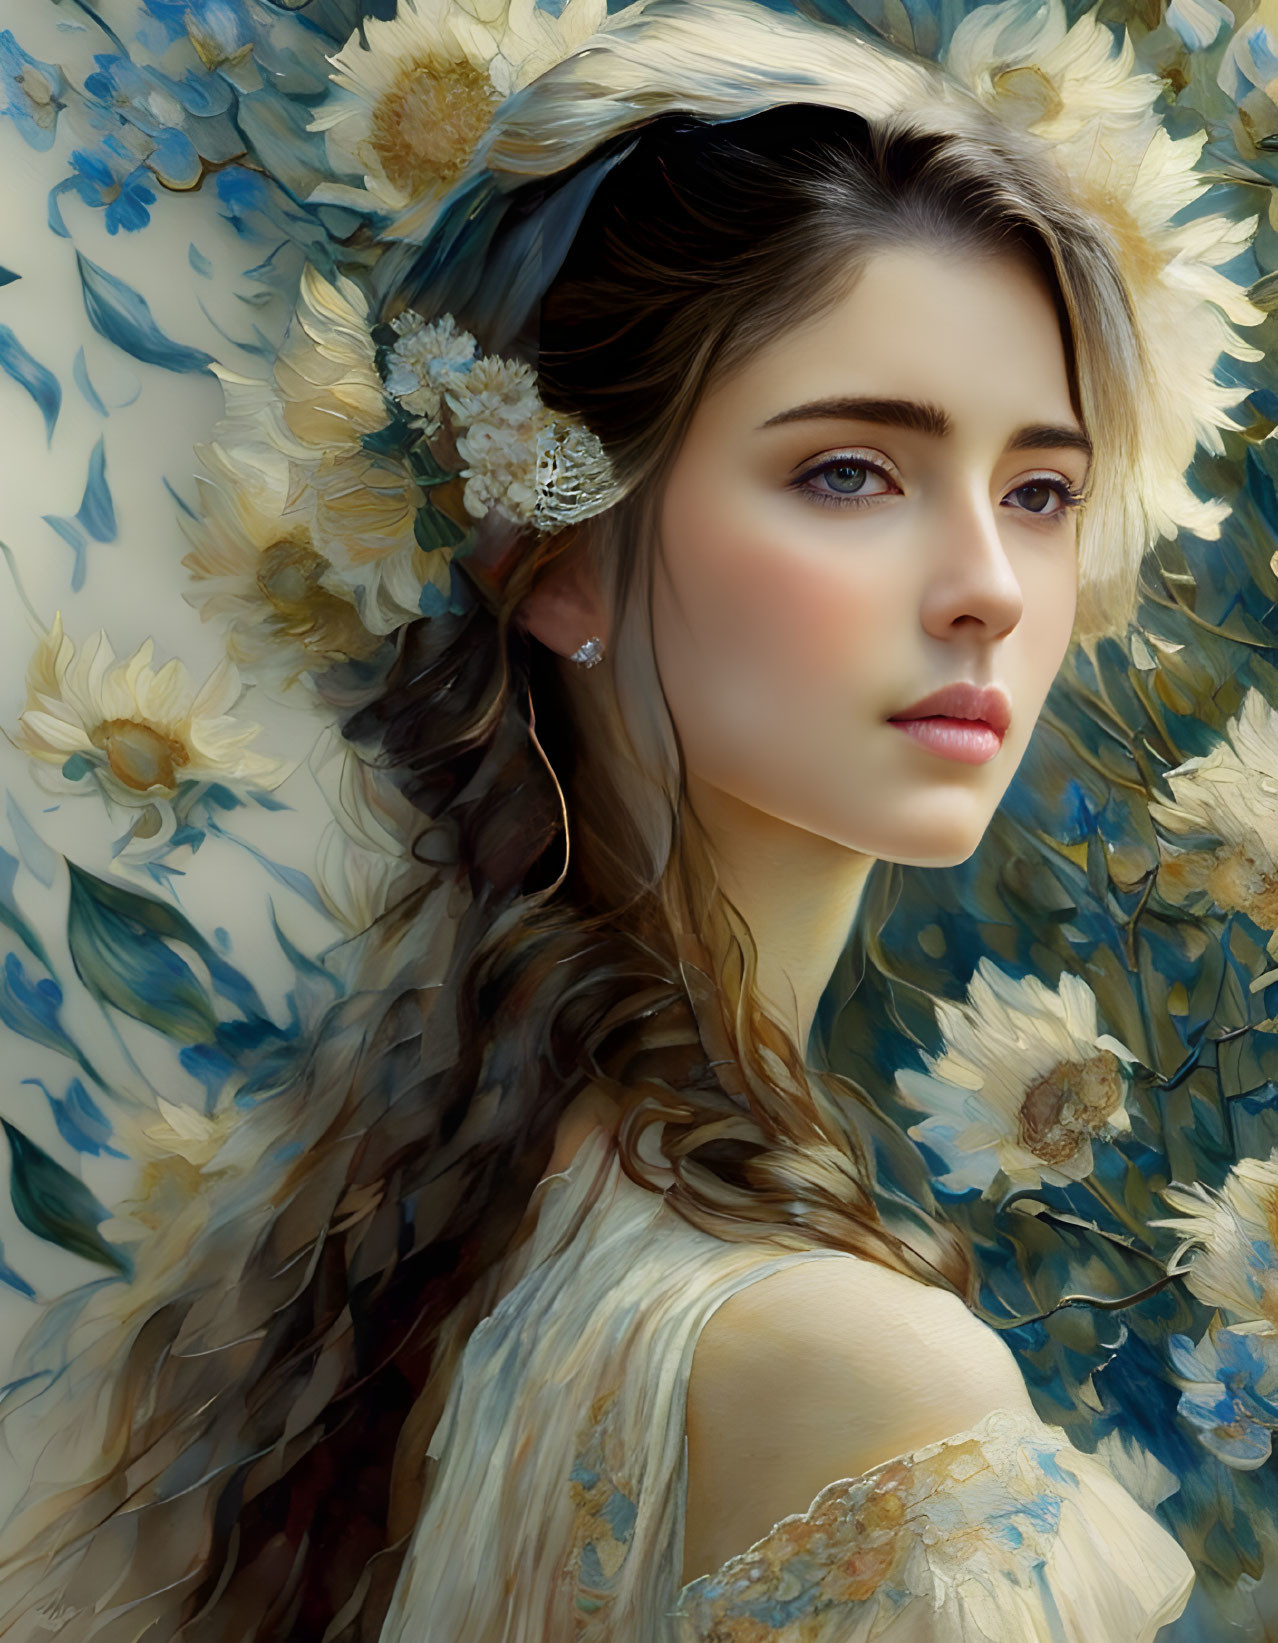 Detailed portrait of a woman with floral hair and background